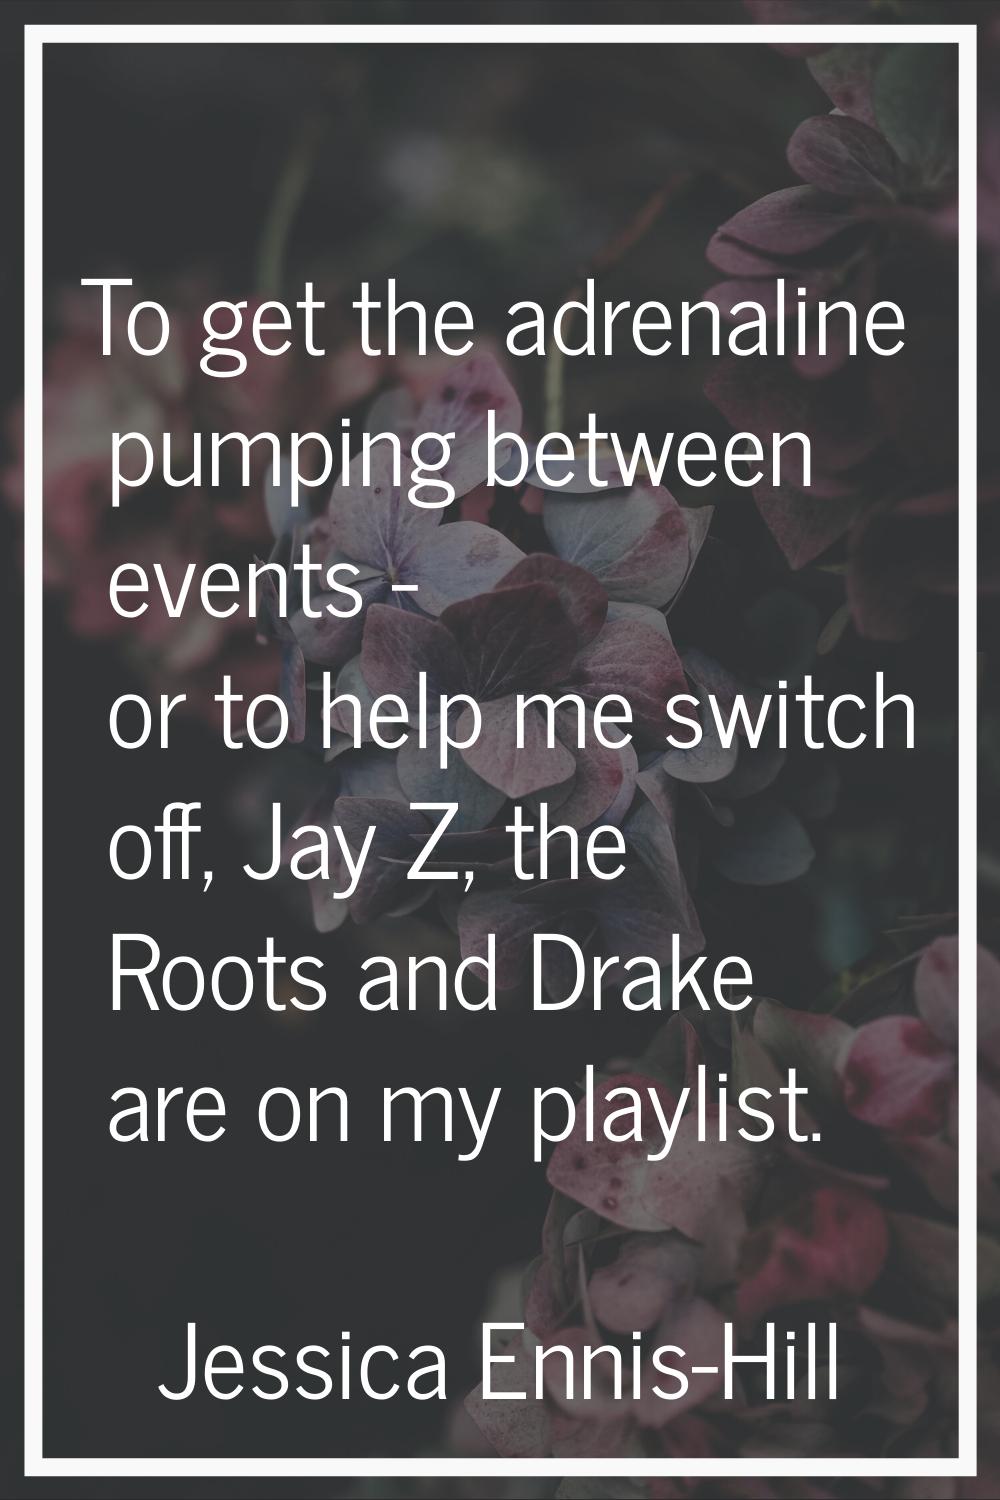 To get the adrenaline pumping between events - or to help me switch off, Jay Z, the Roots and Drake